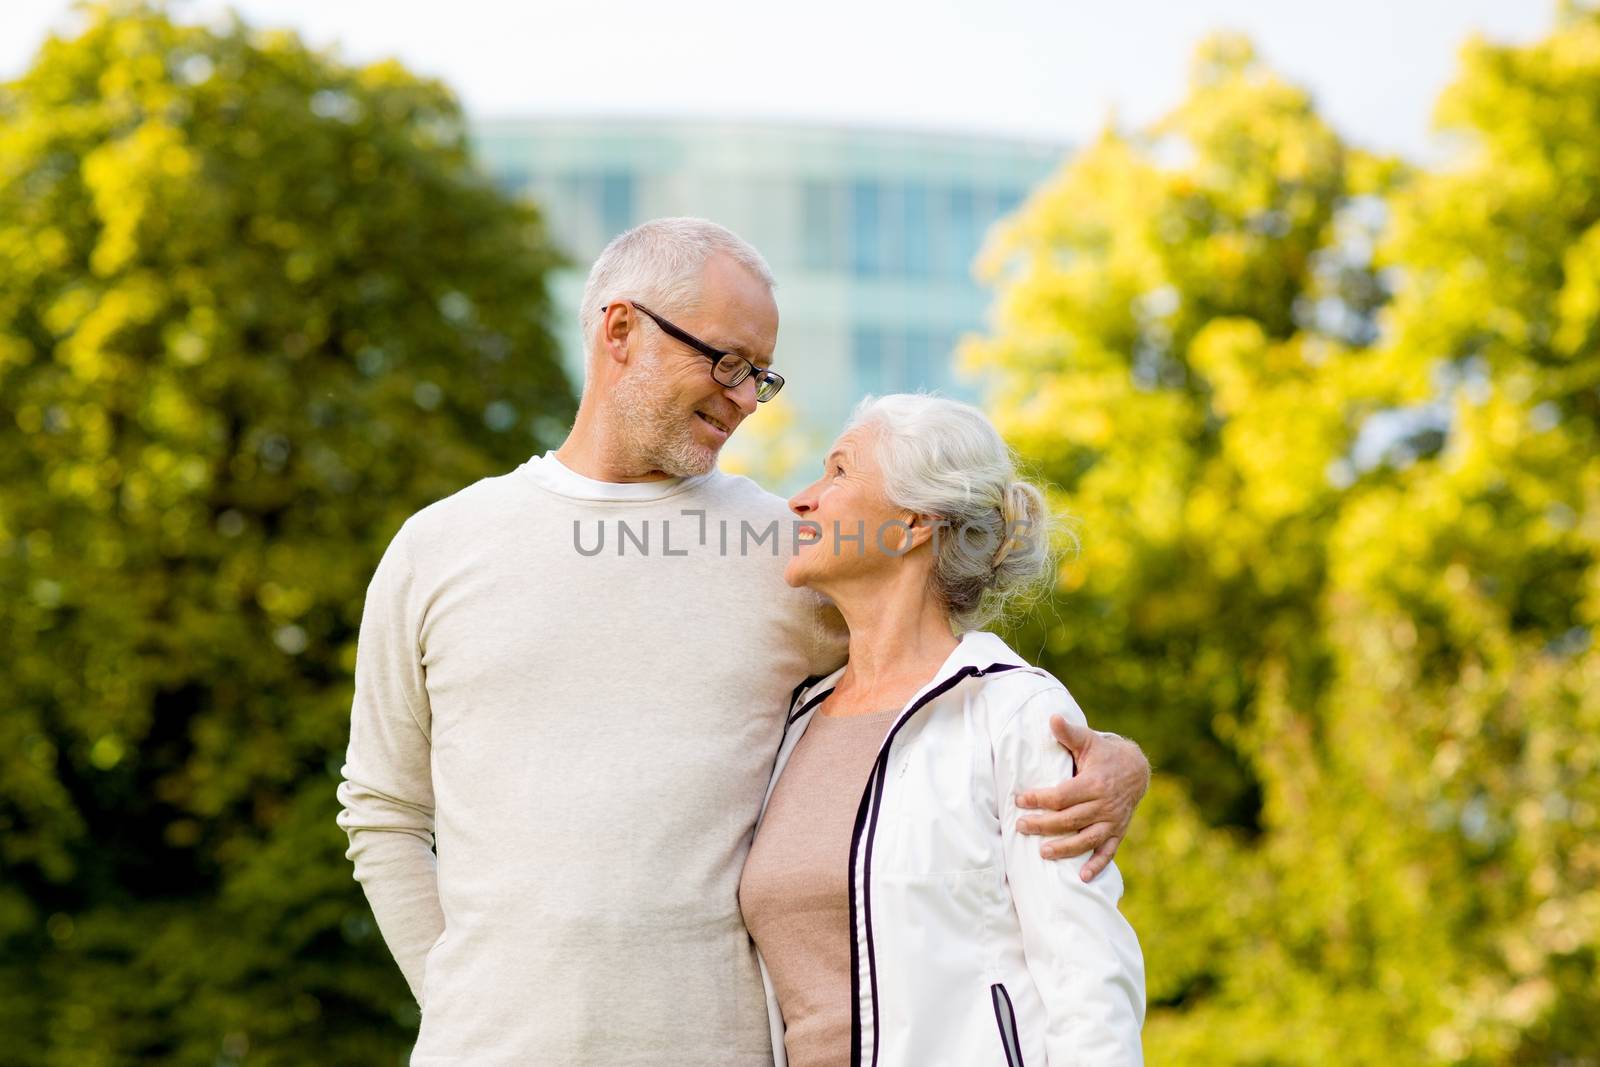 family, age, tourism, travel and people concept - senior couple hugging in city park